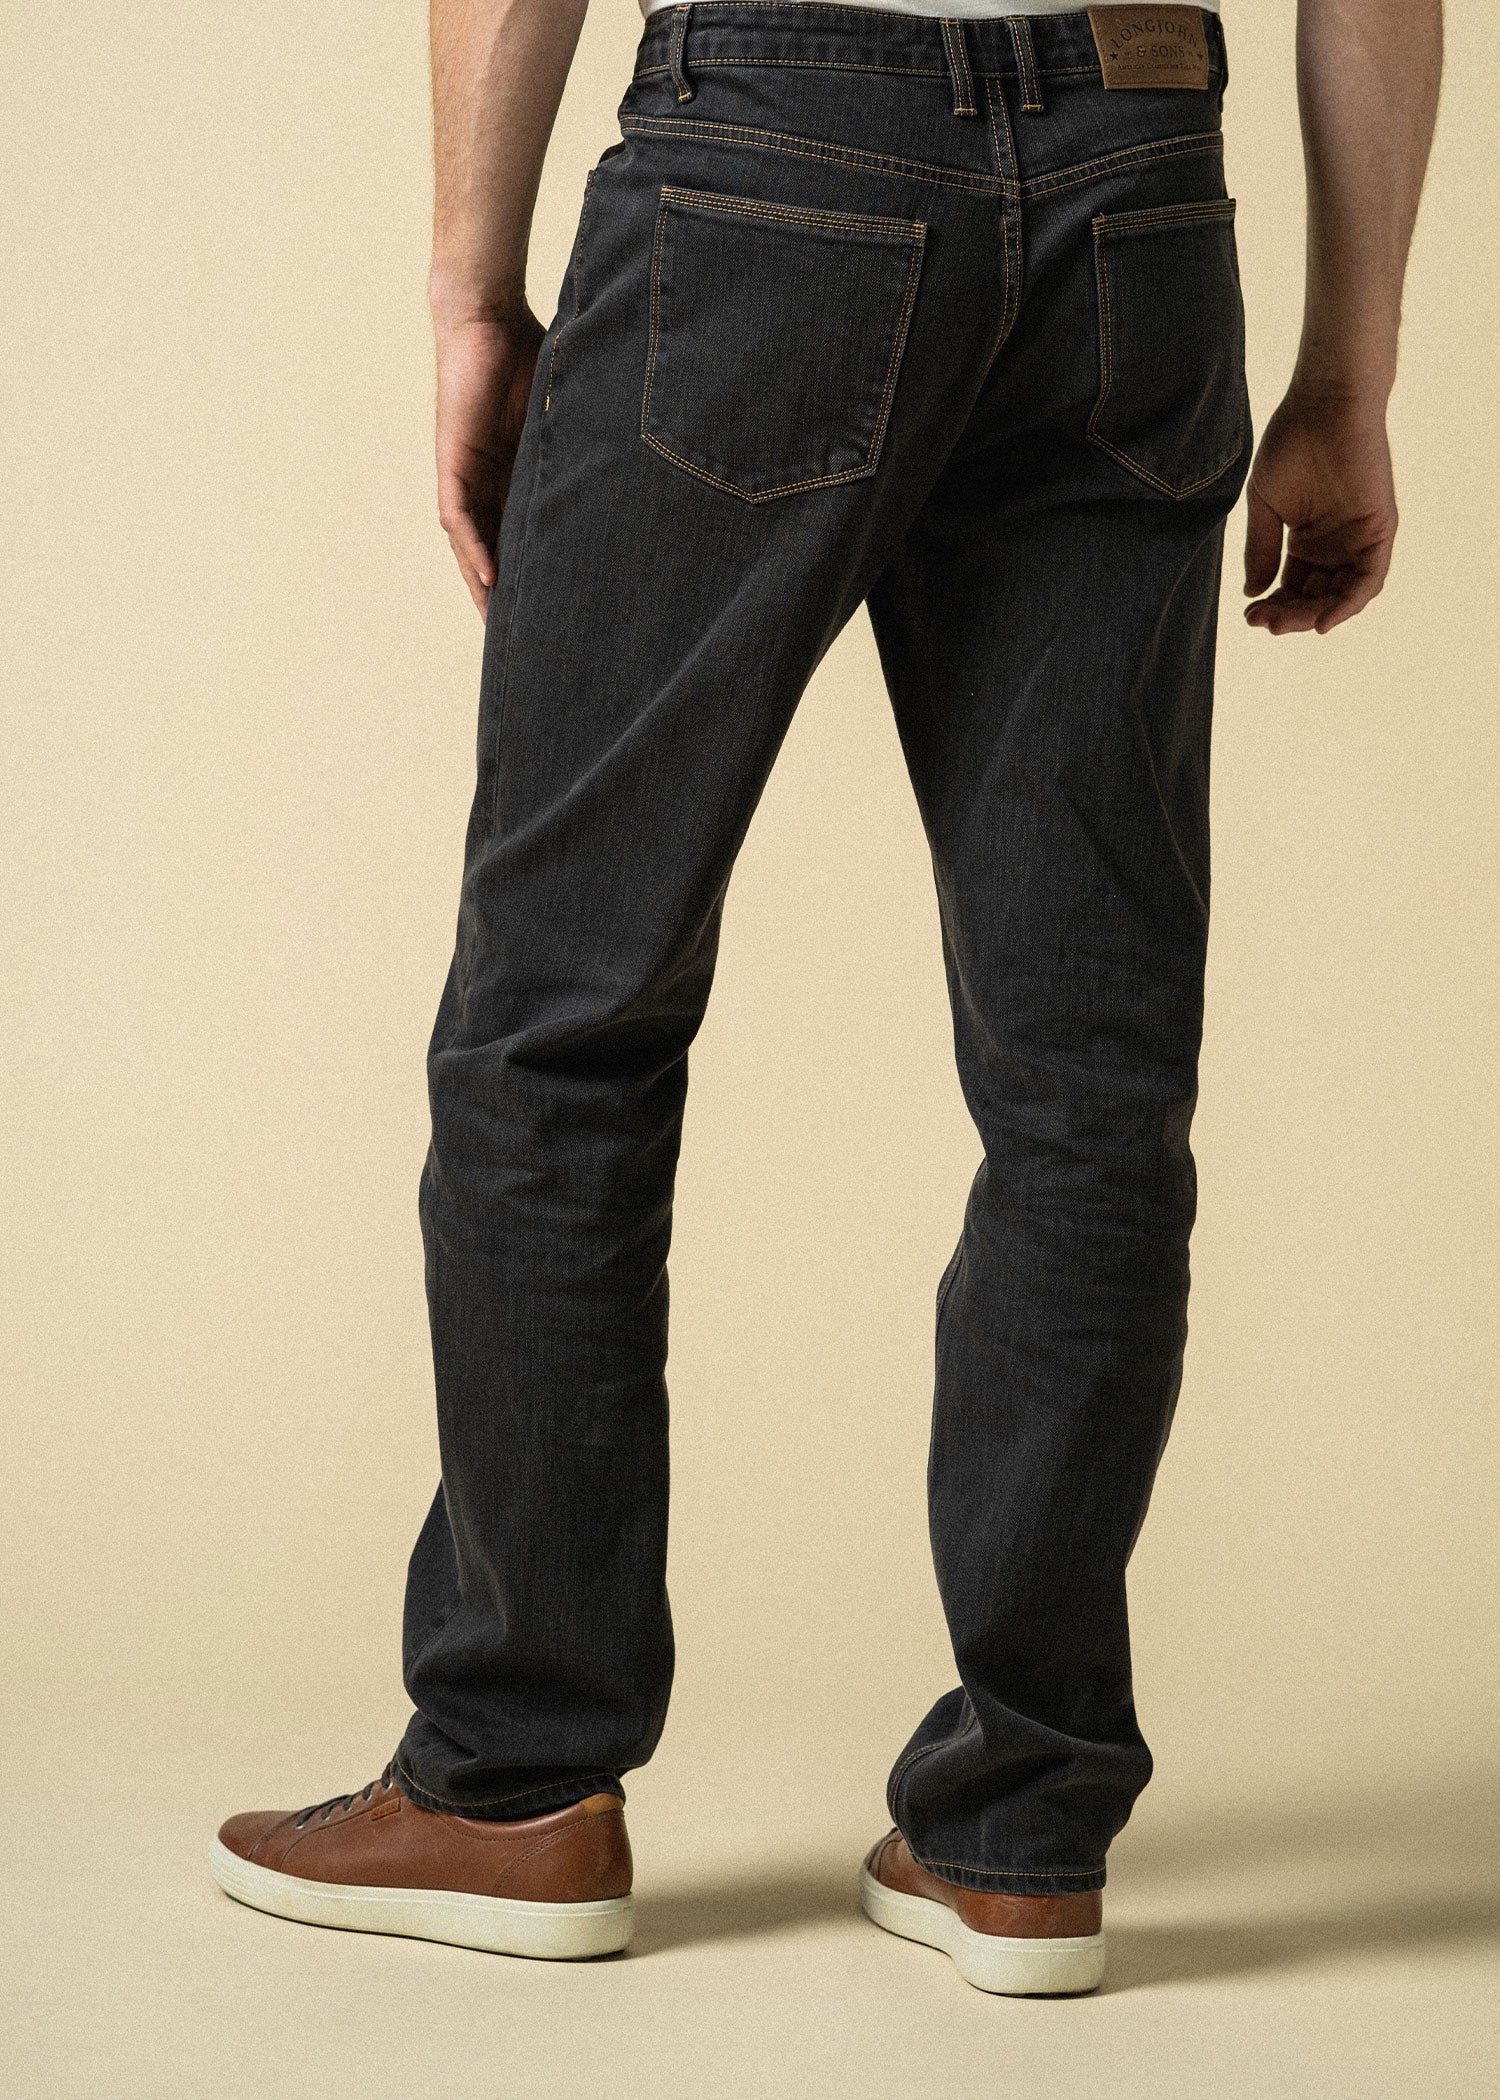 STANDARD STRAIGHT Vintage Black Tall Men's Jeans | Longjohn and Sons – AND